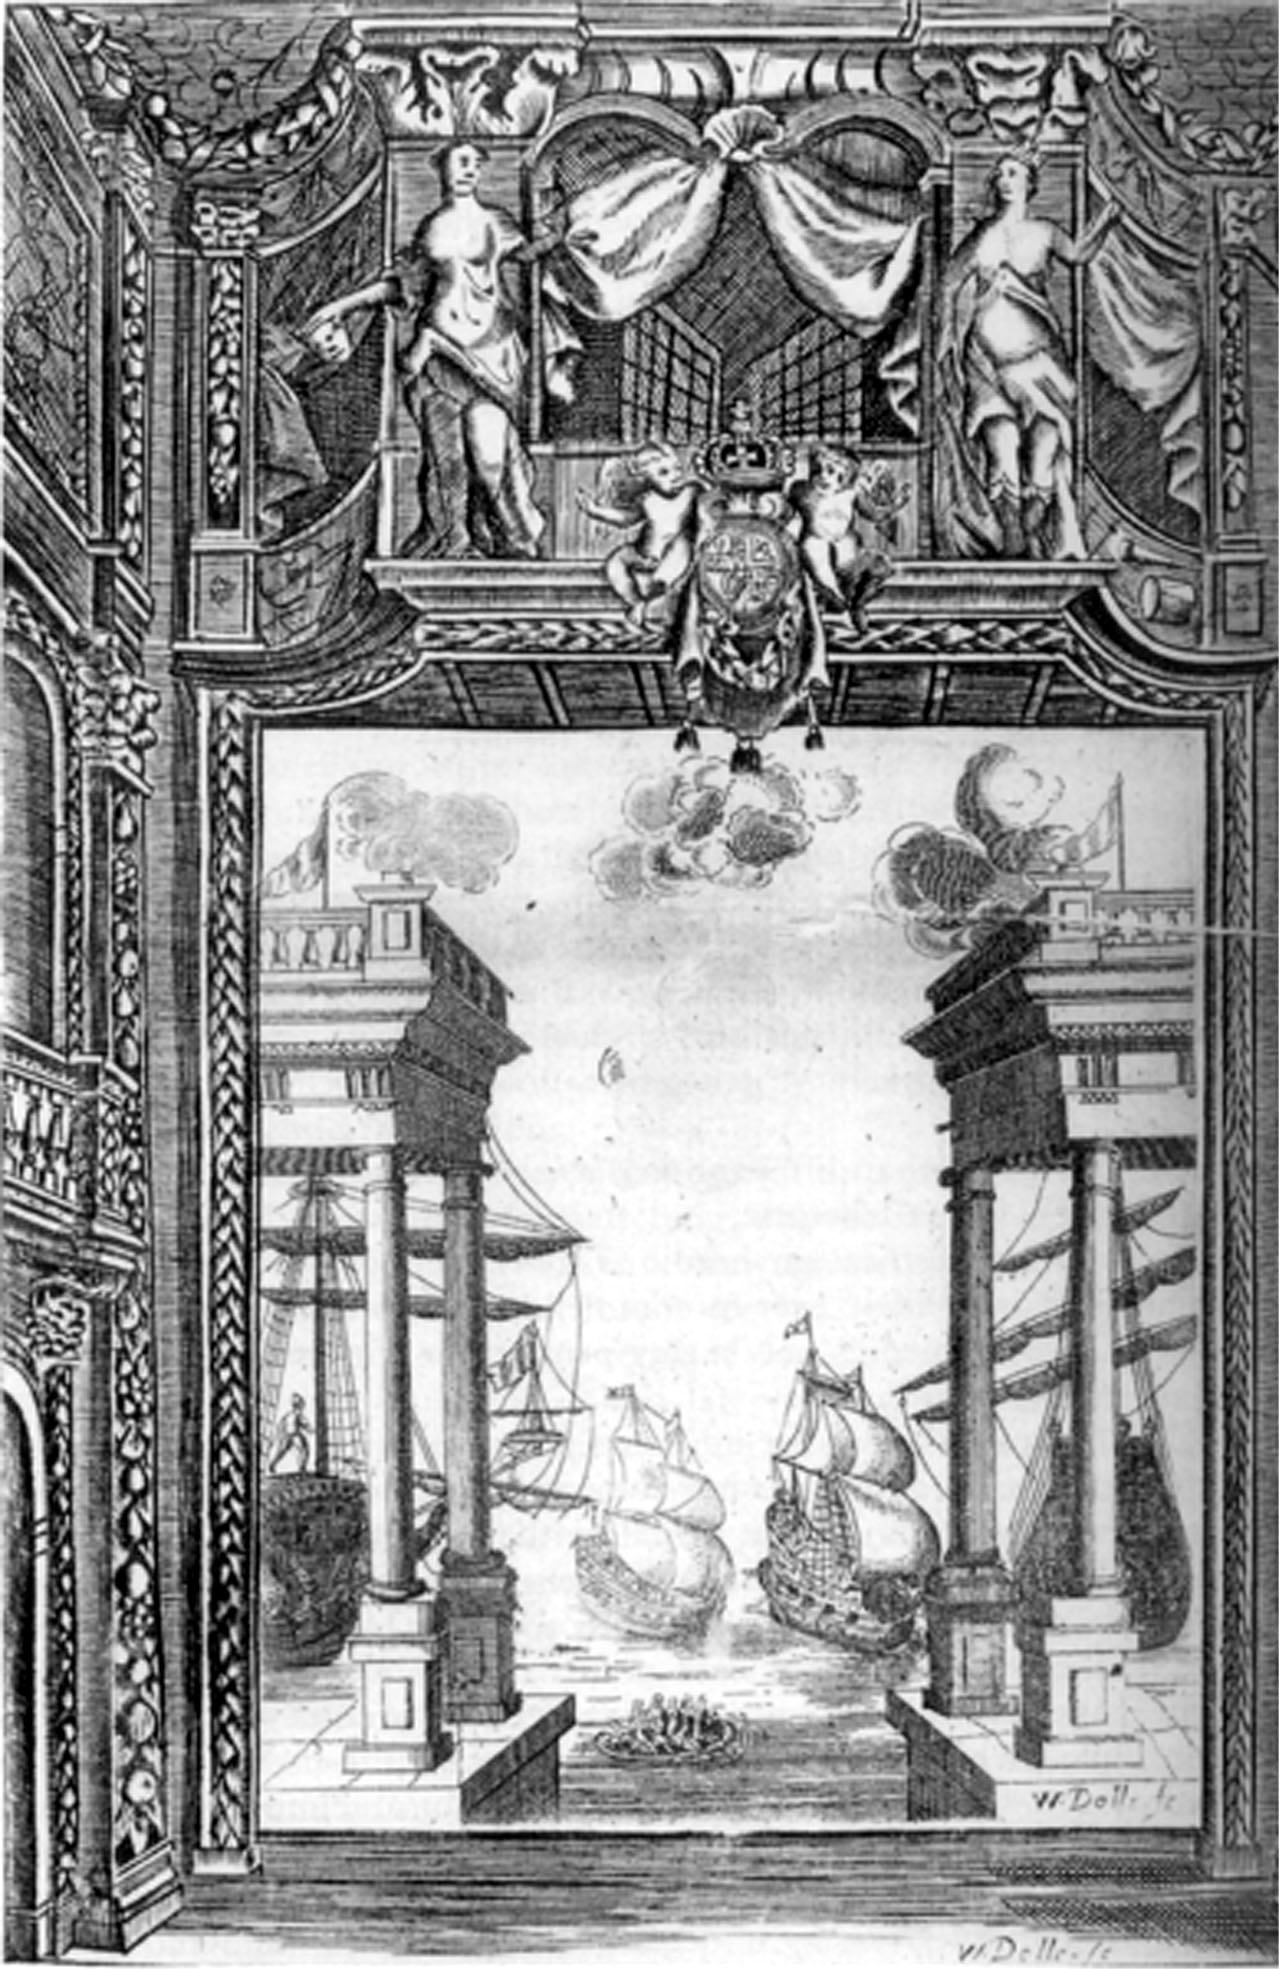 An engraving featuring Elkhana Settle's spectacular play Morocco.